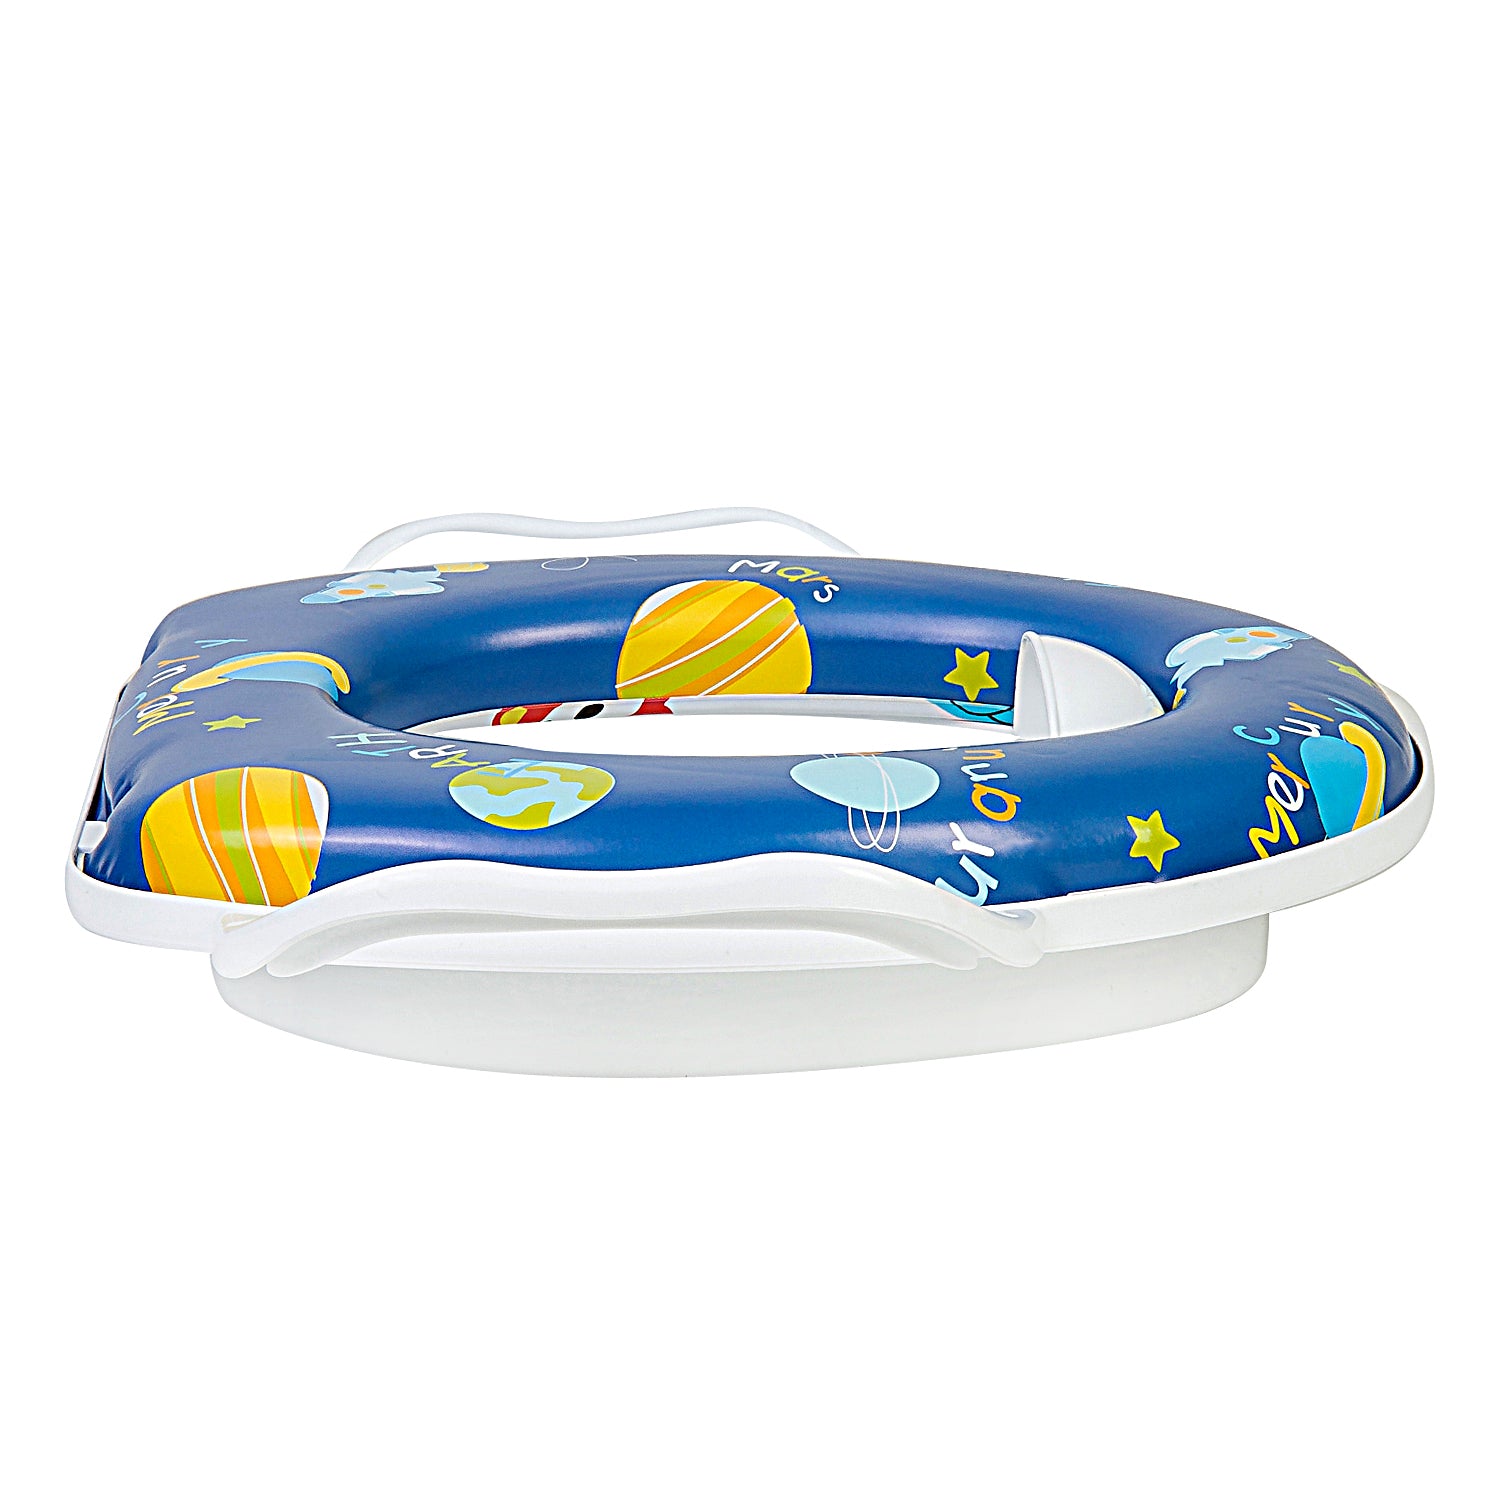 Space Blue Potty Seat With Handle - Baby Moo